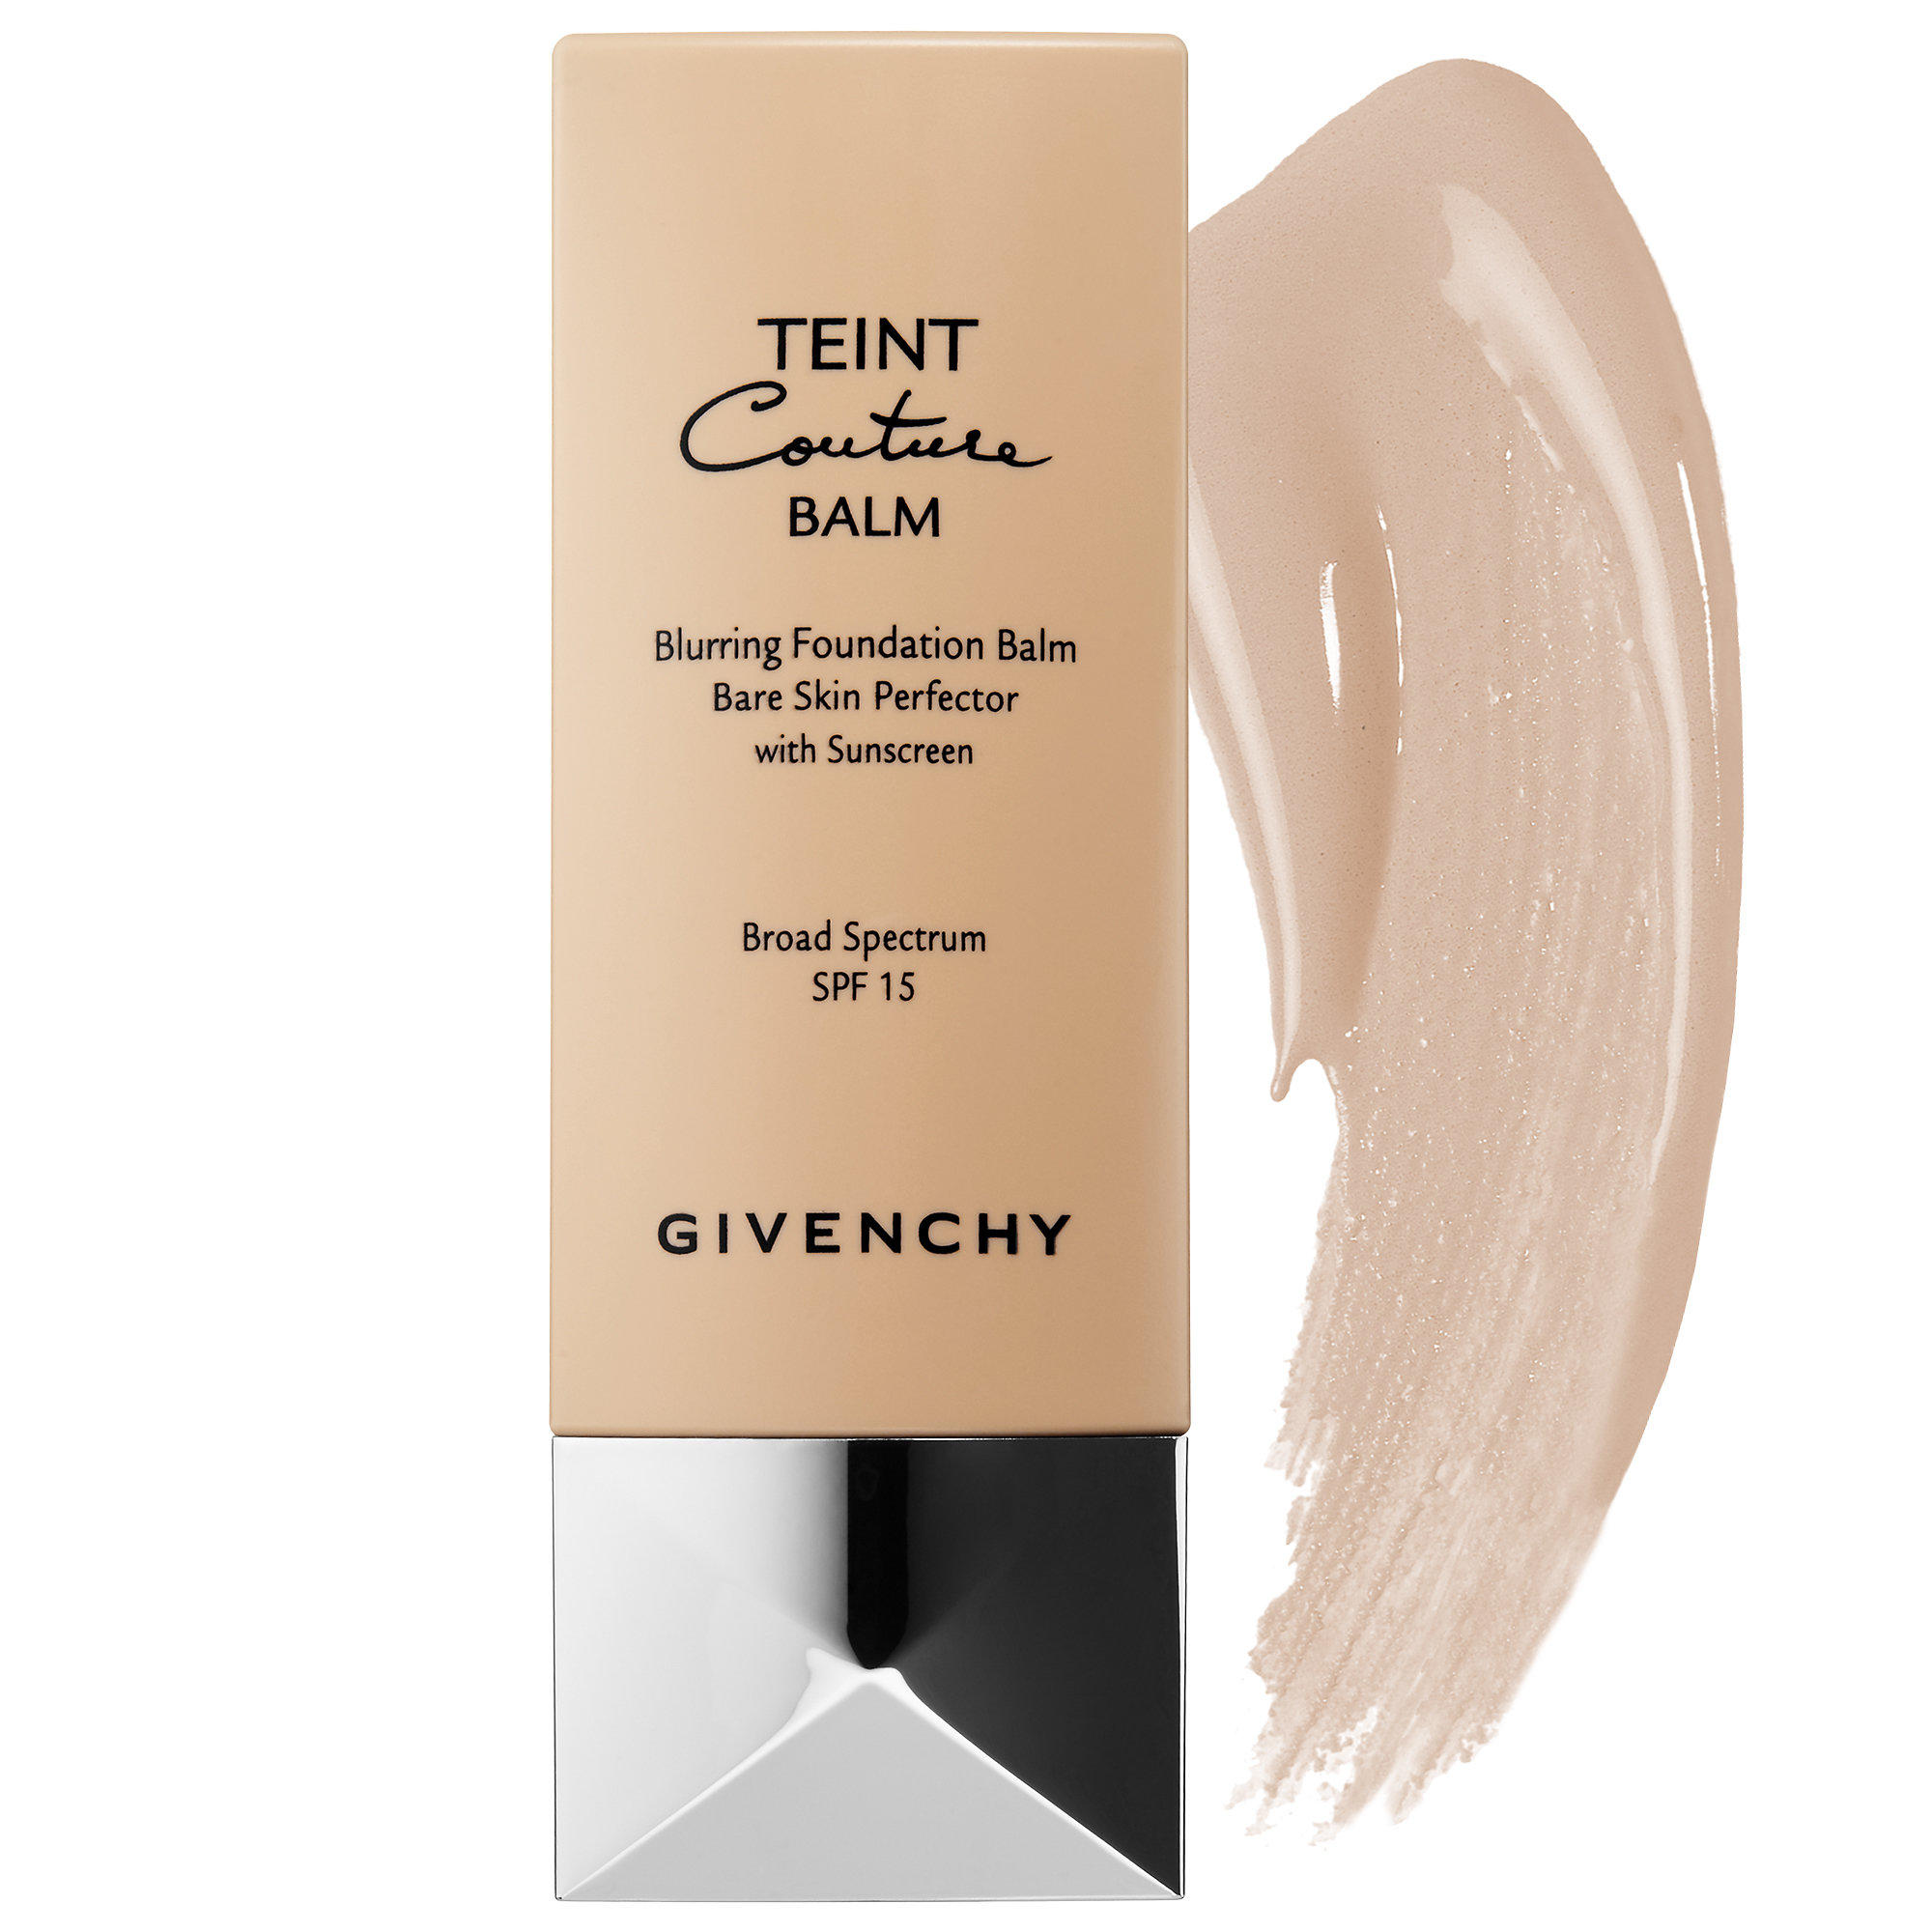 Givenchy Teint Couture Balm Blurring Foundation 4 Nude Beige